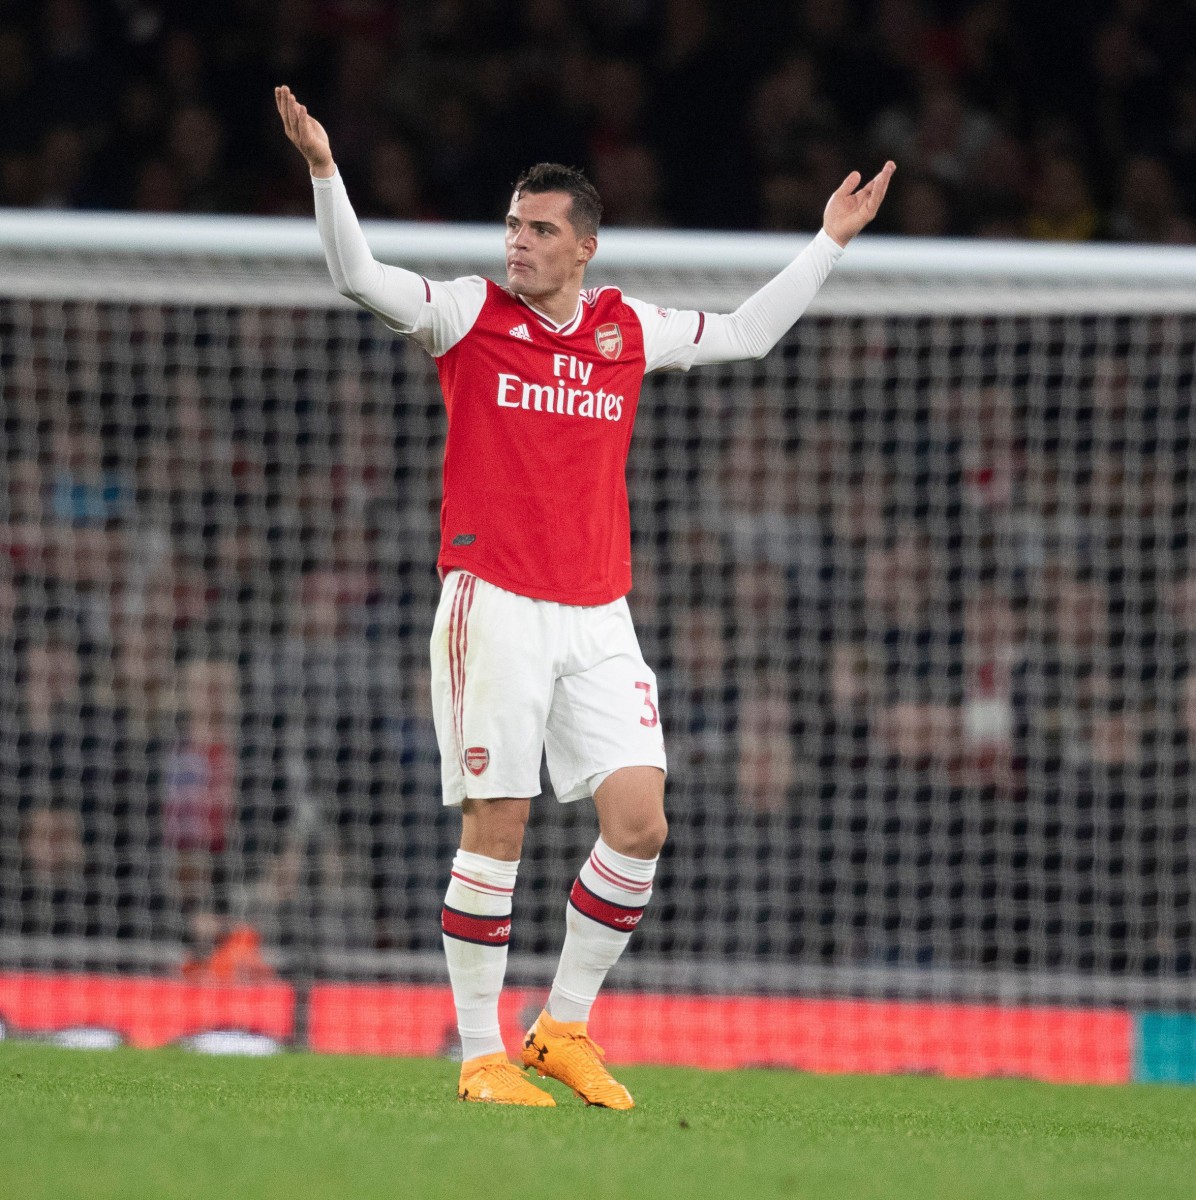 Granit Xhaka has not featured for Arsenal since his controversial reaction during the 2-2 draw with Crystal Palace